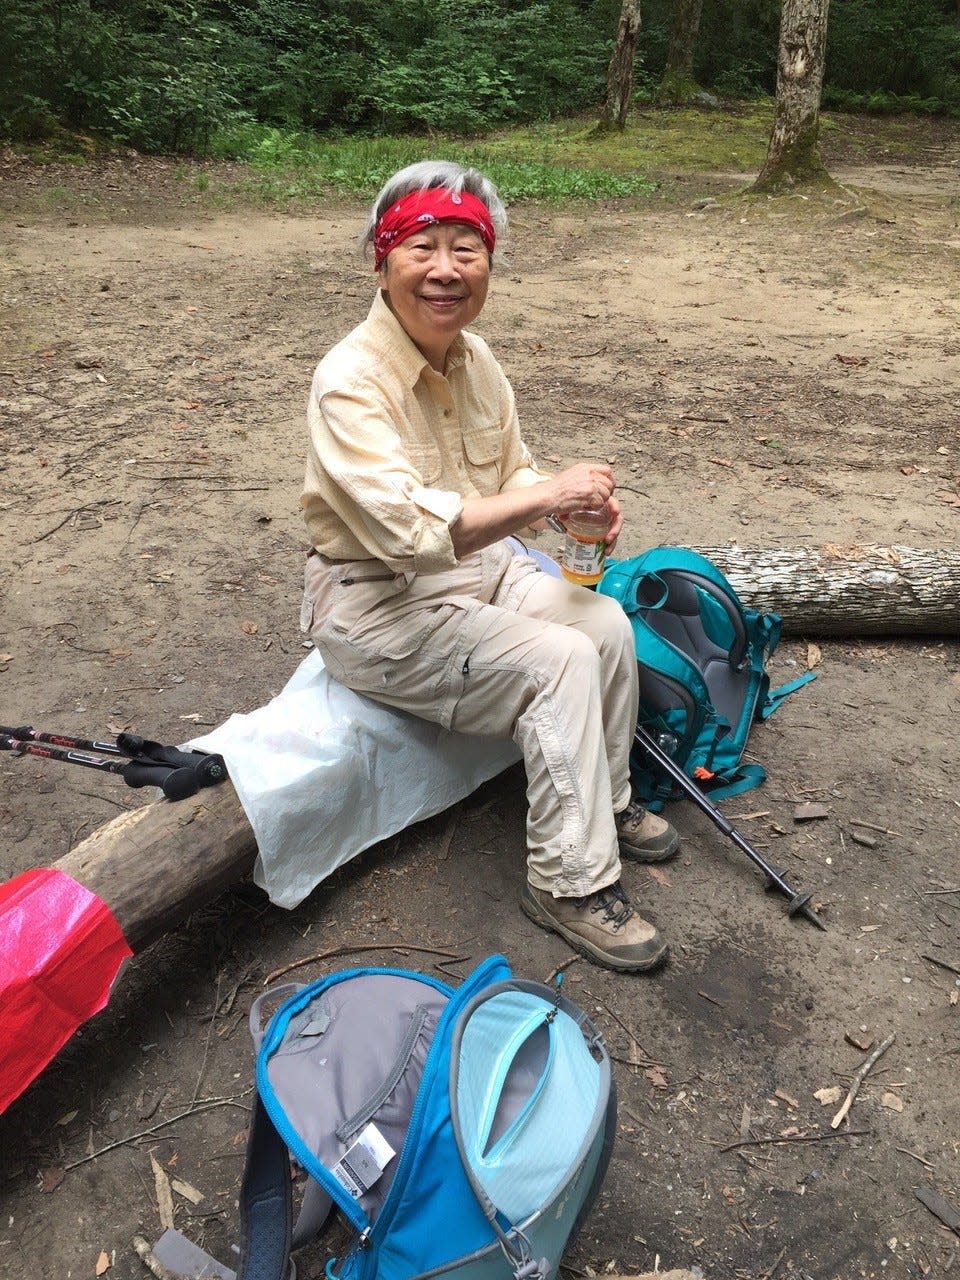 Sue Hung takes a break during a hike in her later years. The well-liked resident and native Chinese woman, who had come to Knoxville in the early 1960s with her husband, Dr. Jim Hung, died March 11 at the age of 89.